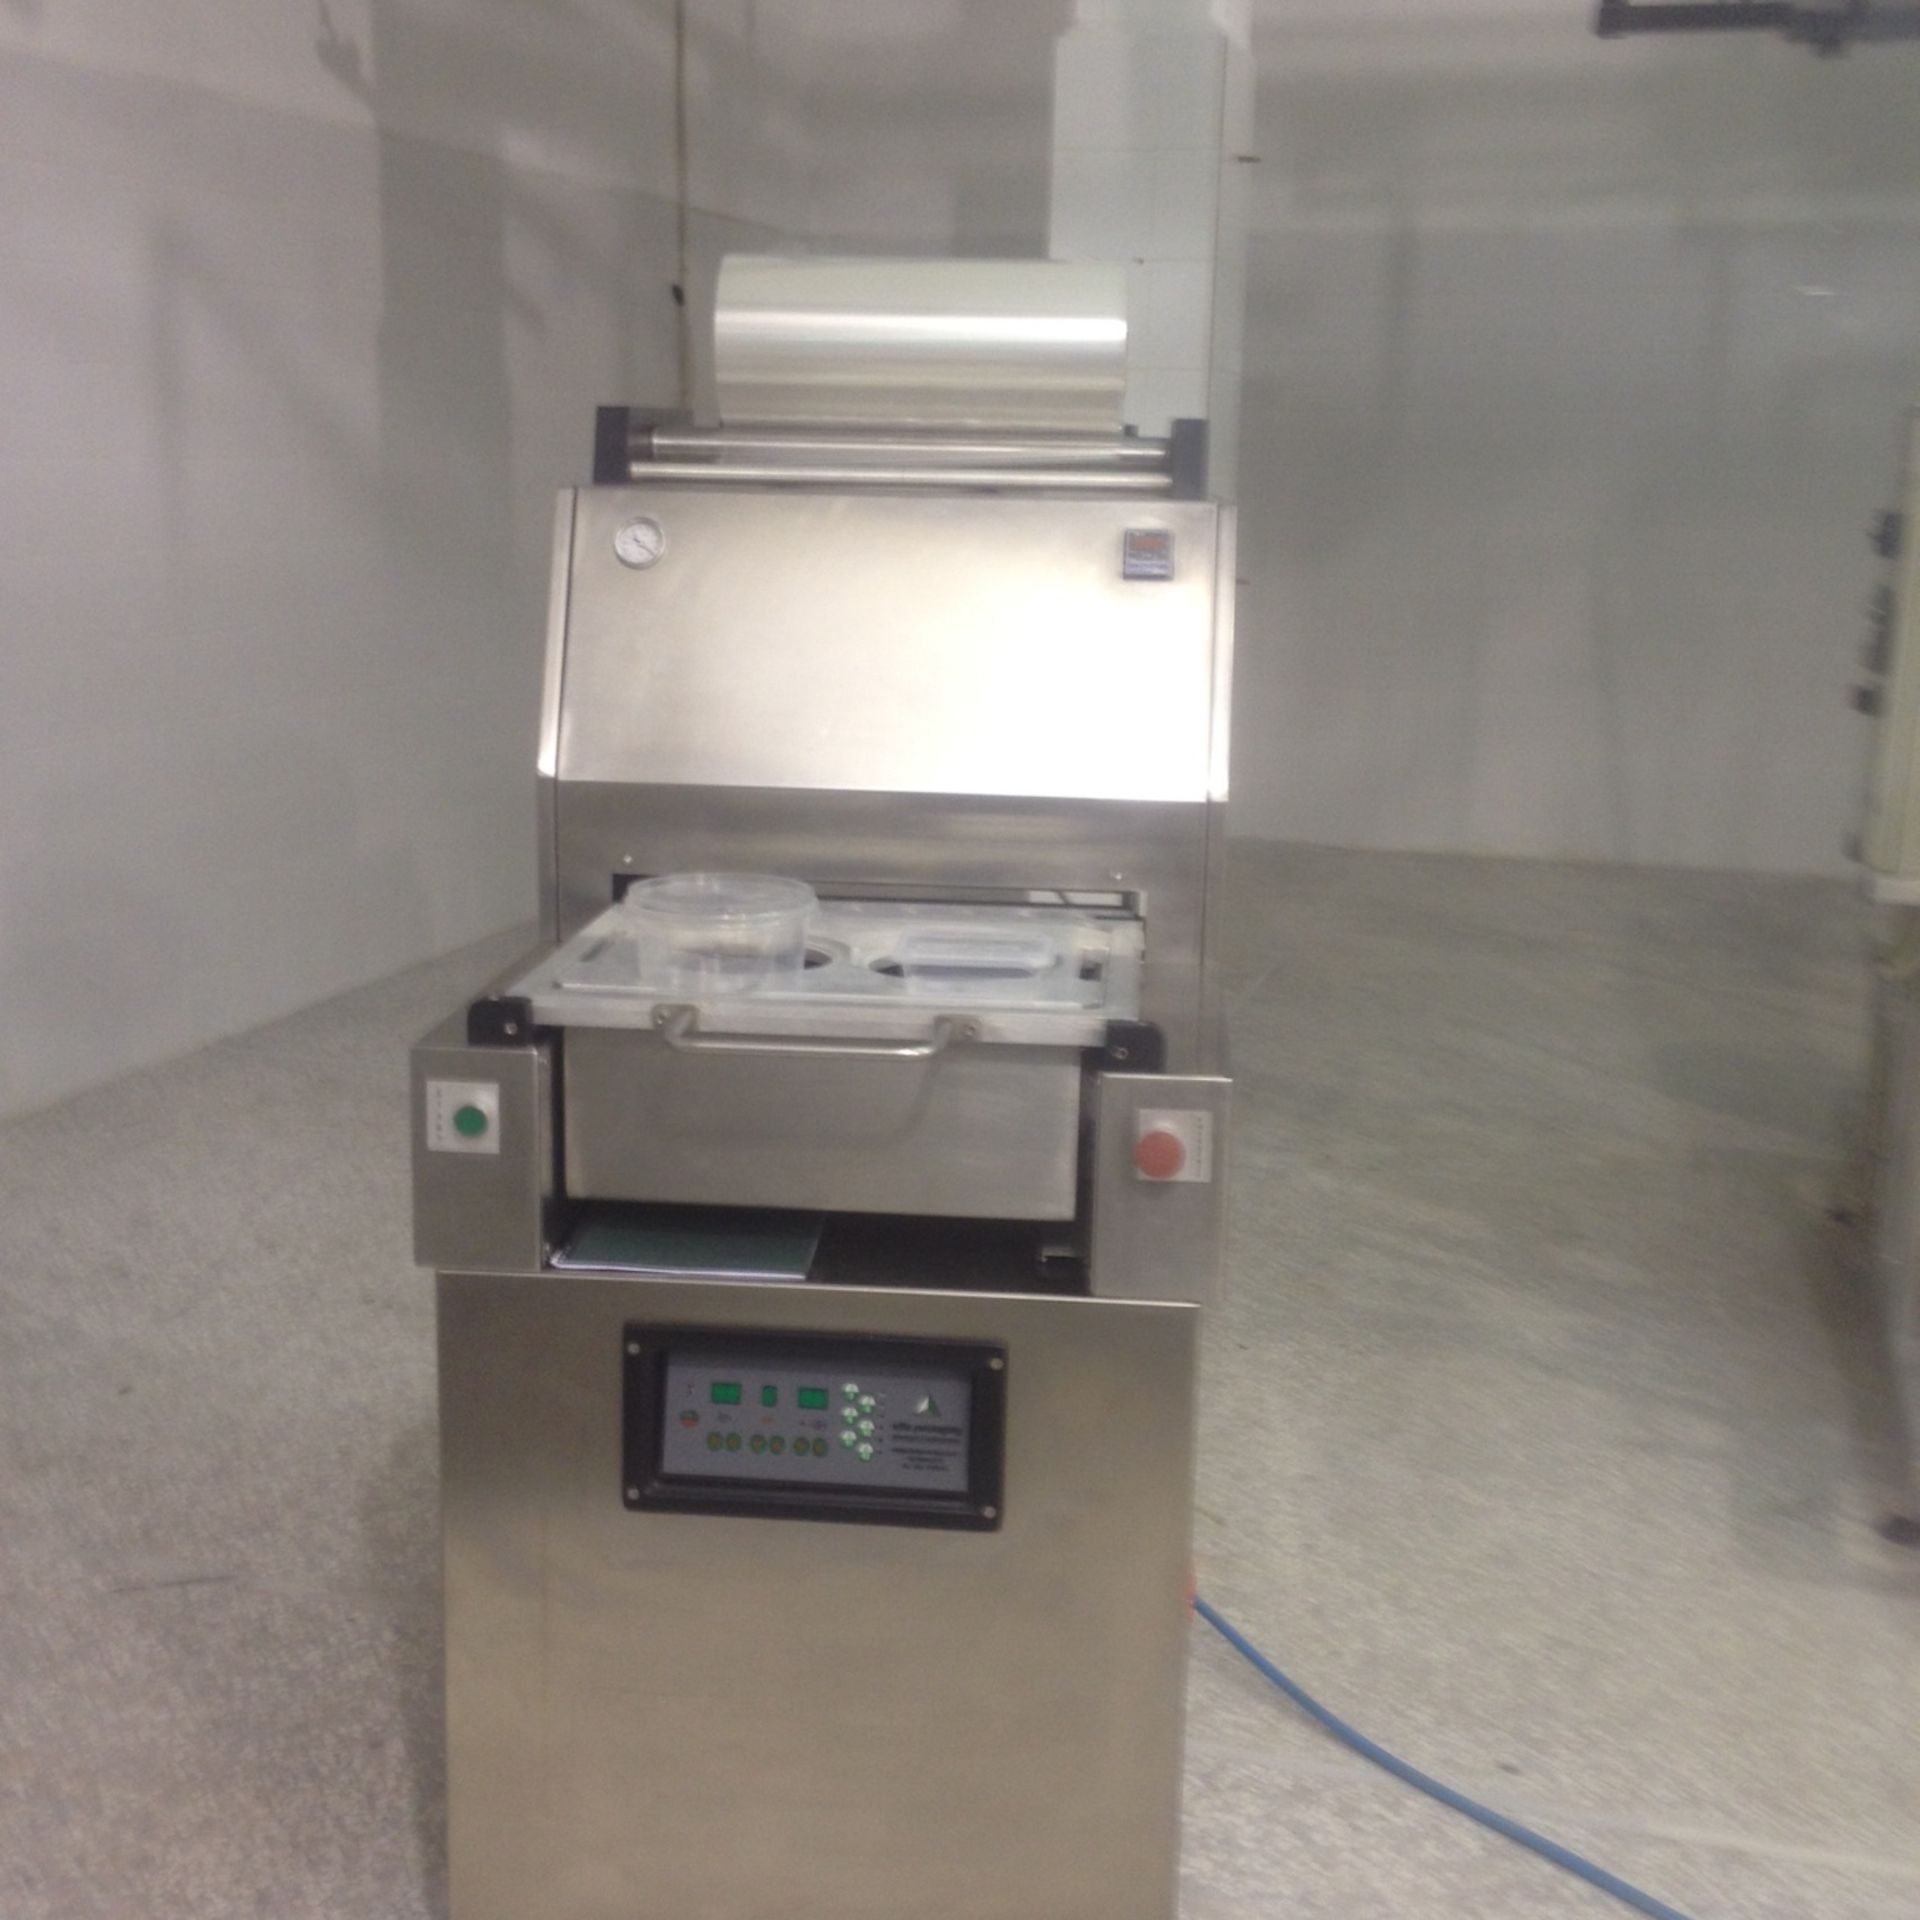 Effe Packaging Thermoforming Cup Sealer, Equipped with Gas Flush, Suitable for Cheese, Yogurt, Past - Image 2 of 5